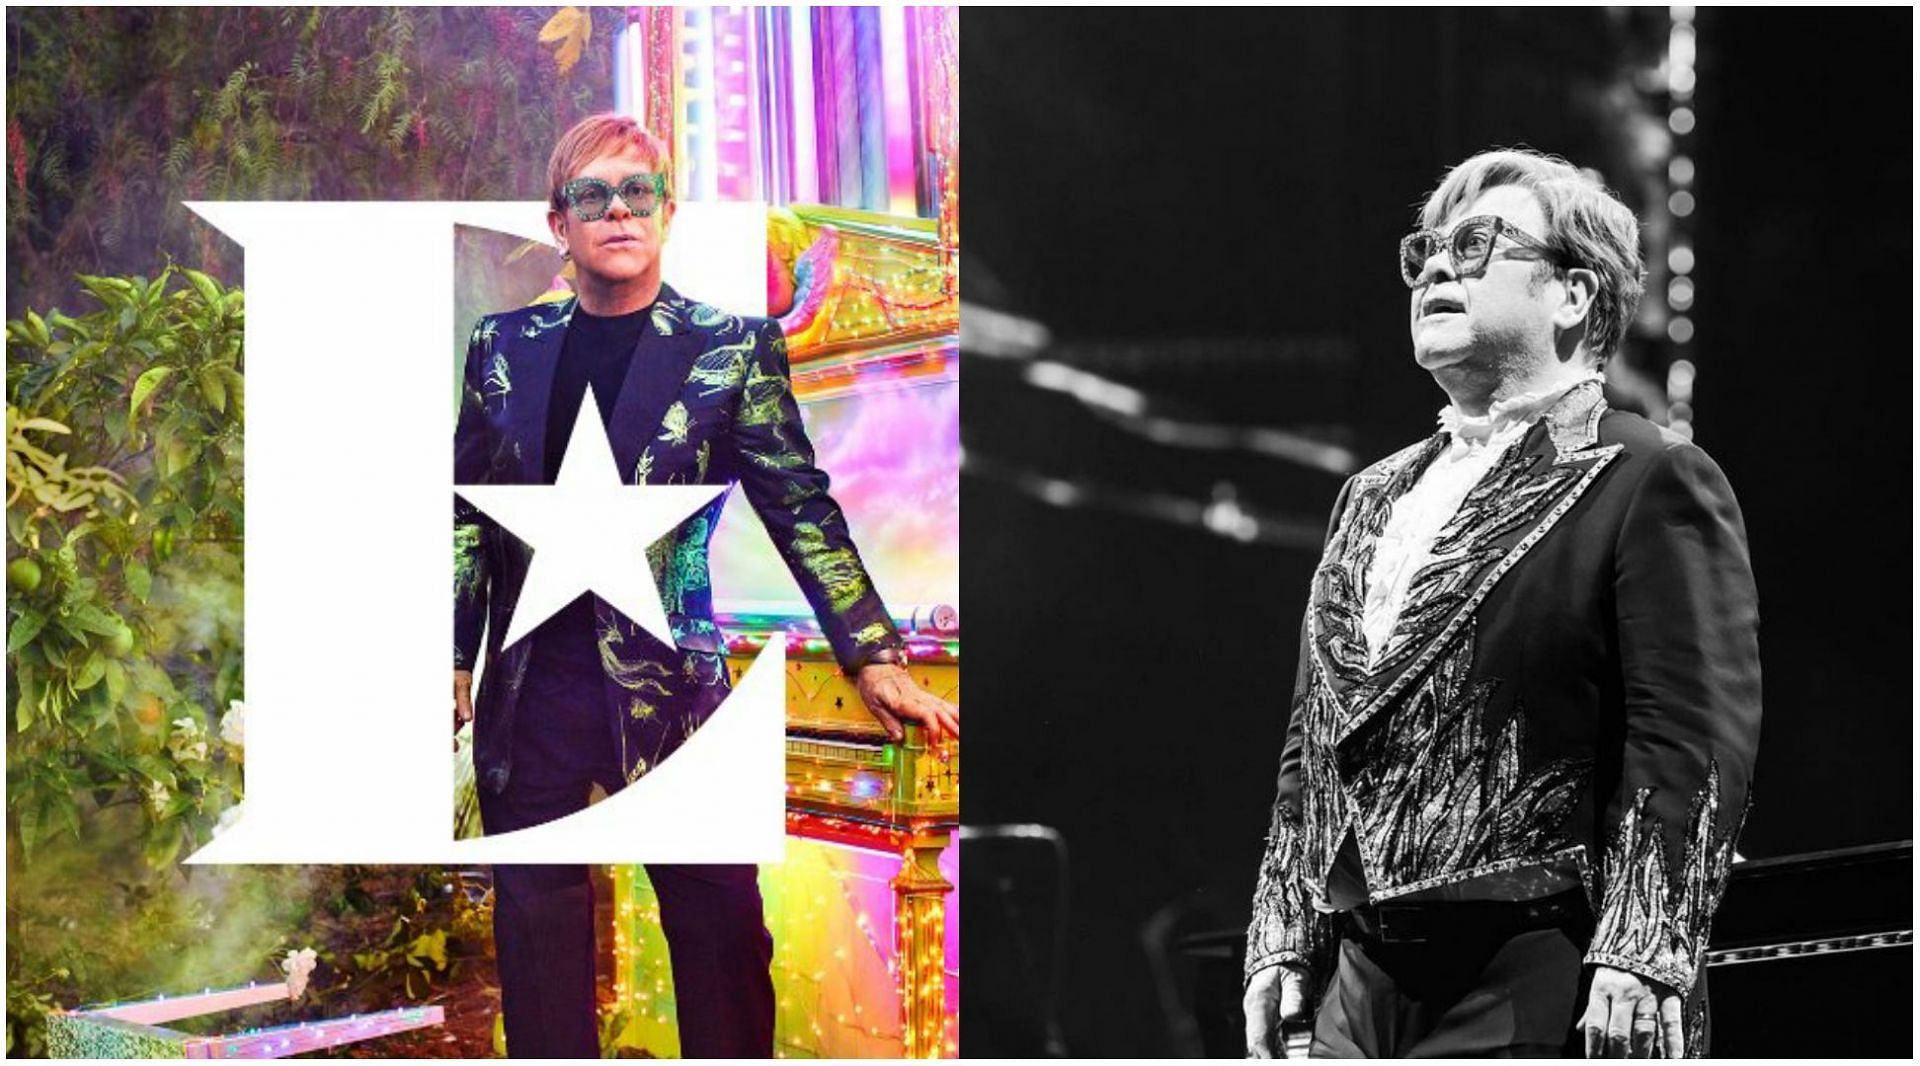 British pop icon Elton John has announced the final North American dates of his Farewell Yellow Brick Road The Final Tour. The singer celebrated his 75th birthday on 25th March. (Images via Twitter @eltonjohn)